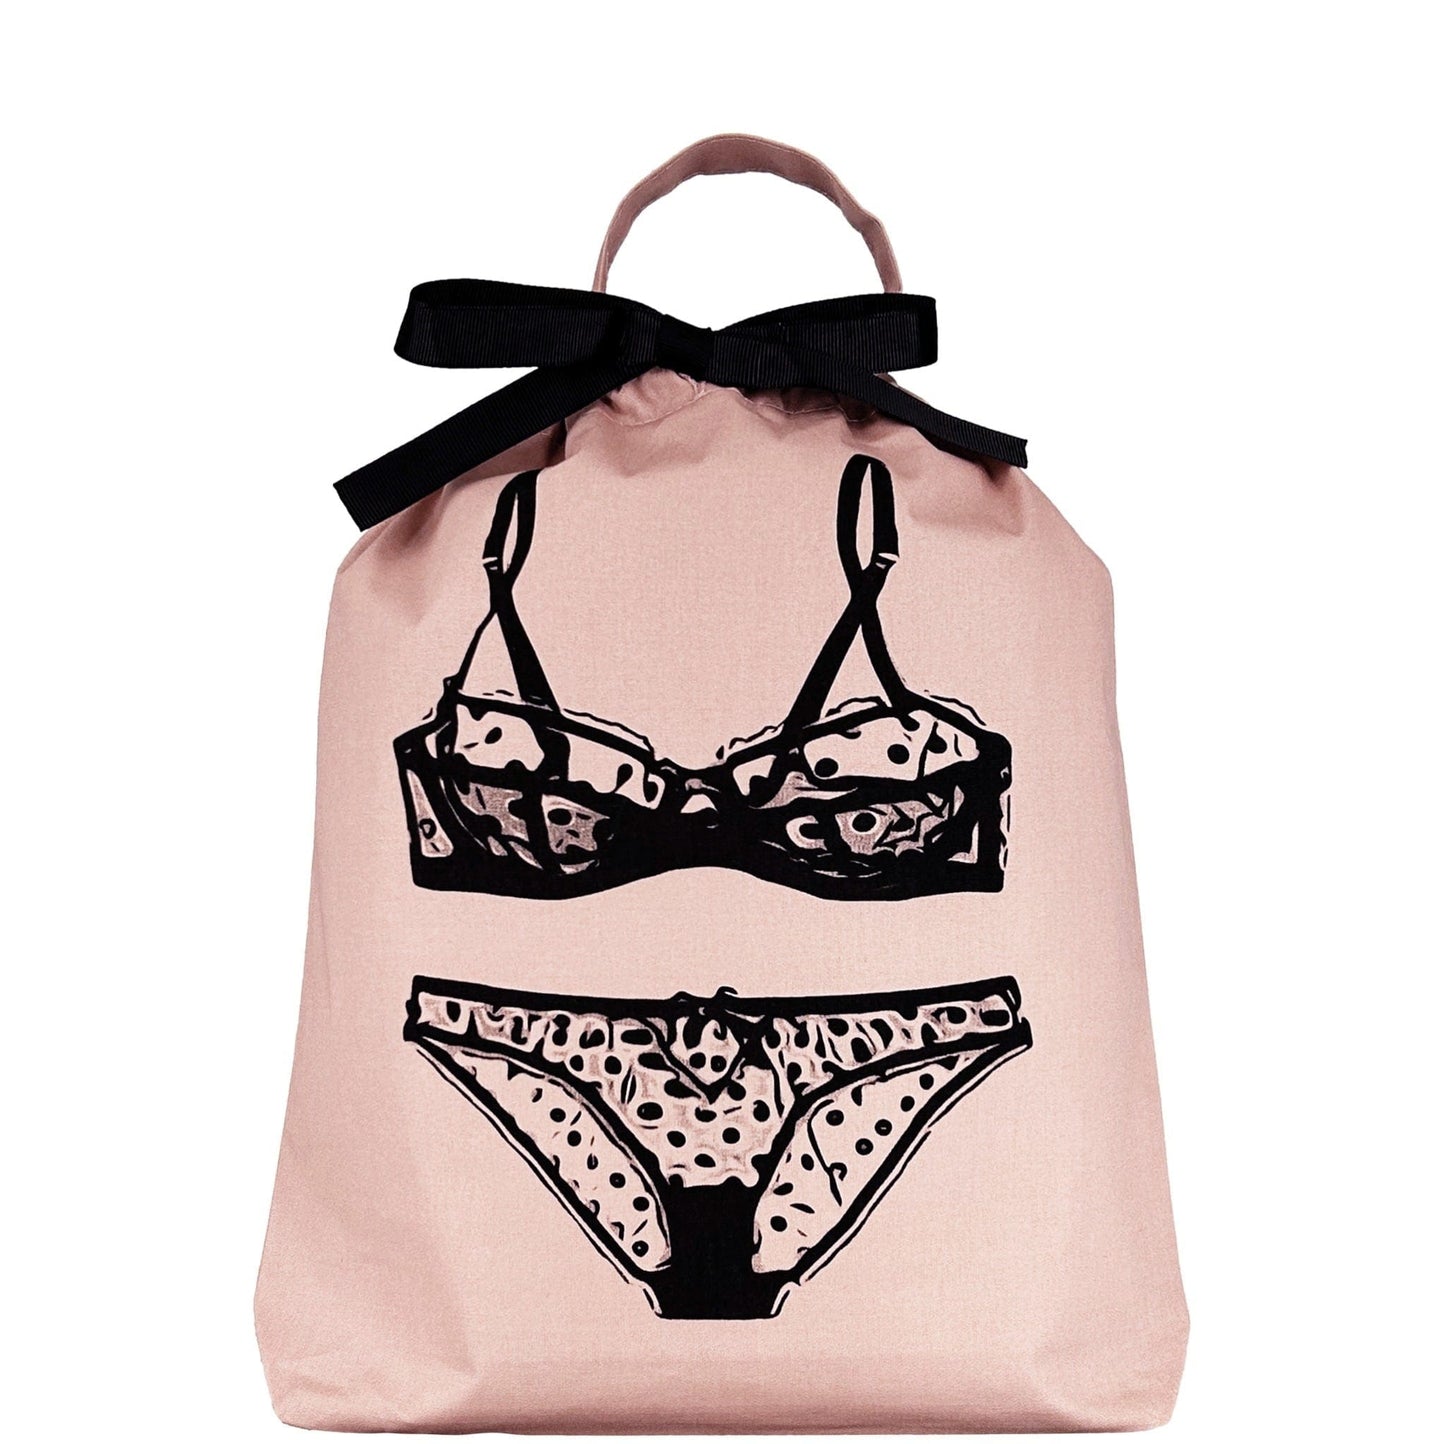 lingerie bag, lingerie bag Suppliers and Manufacturers at